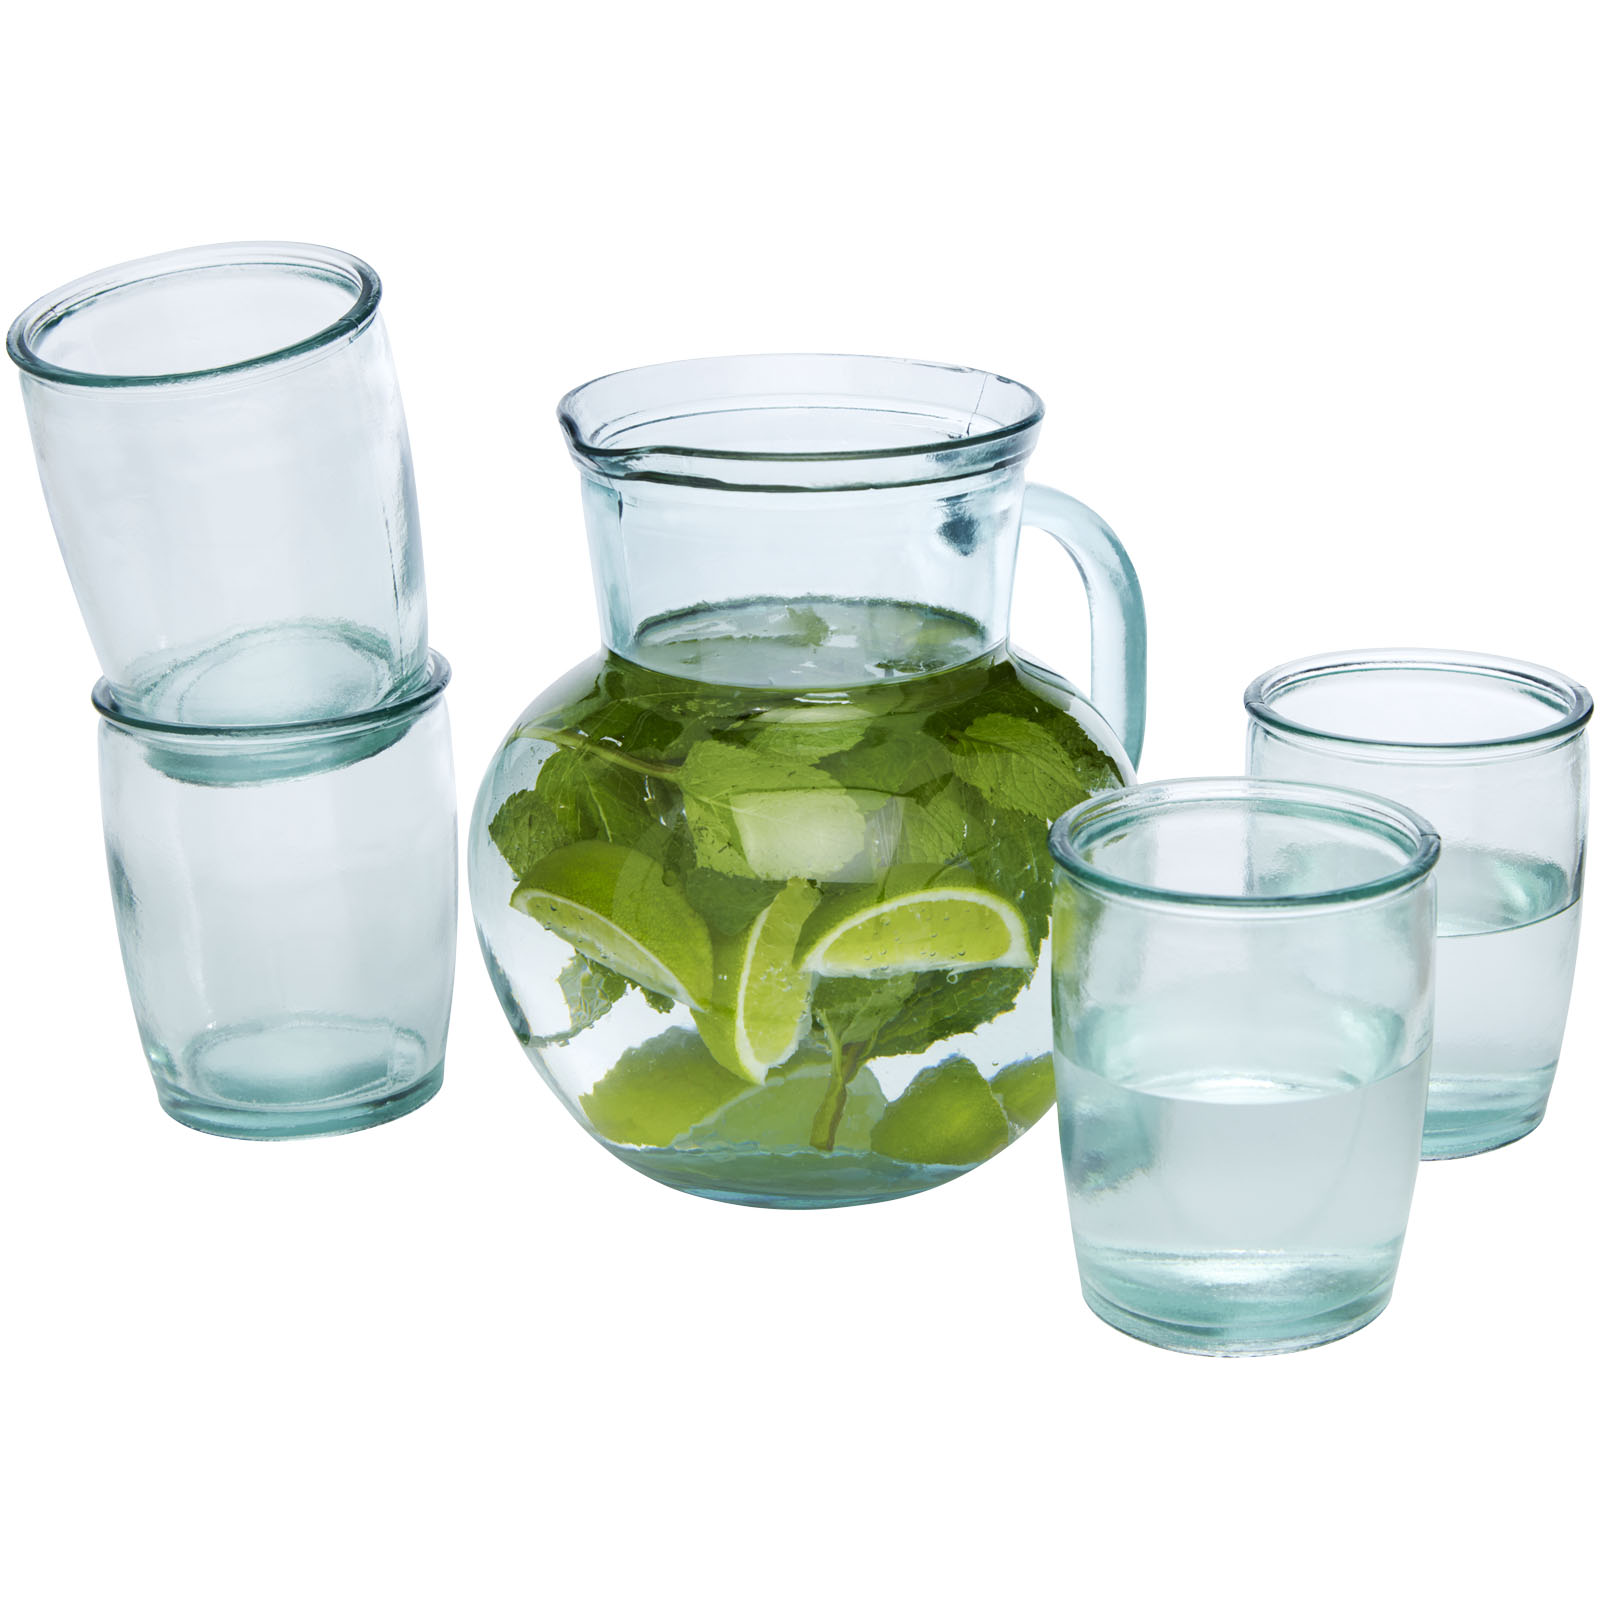 5-Piece Recycled Glass Jar and Cup Set - Painswick